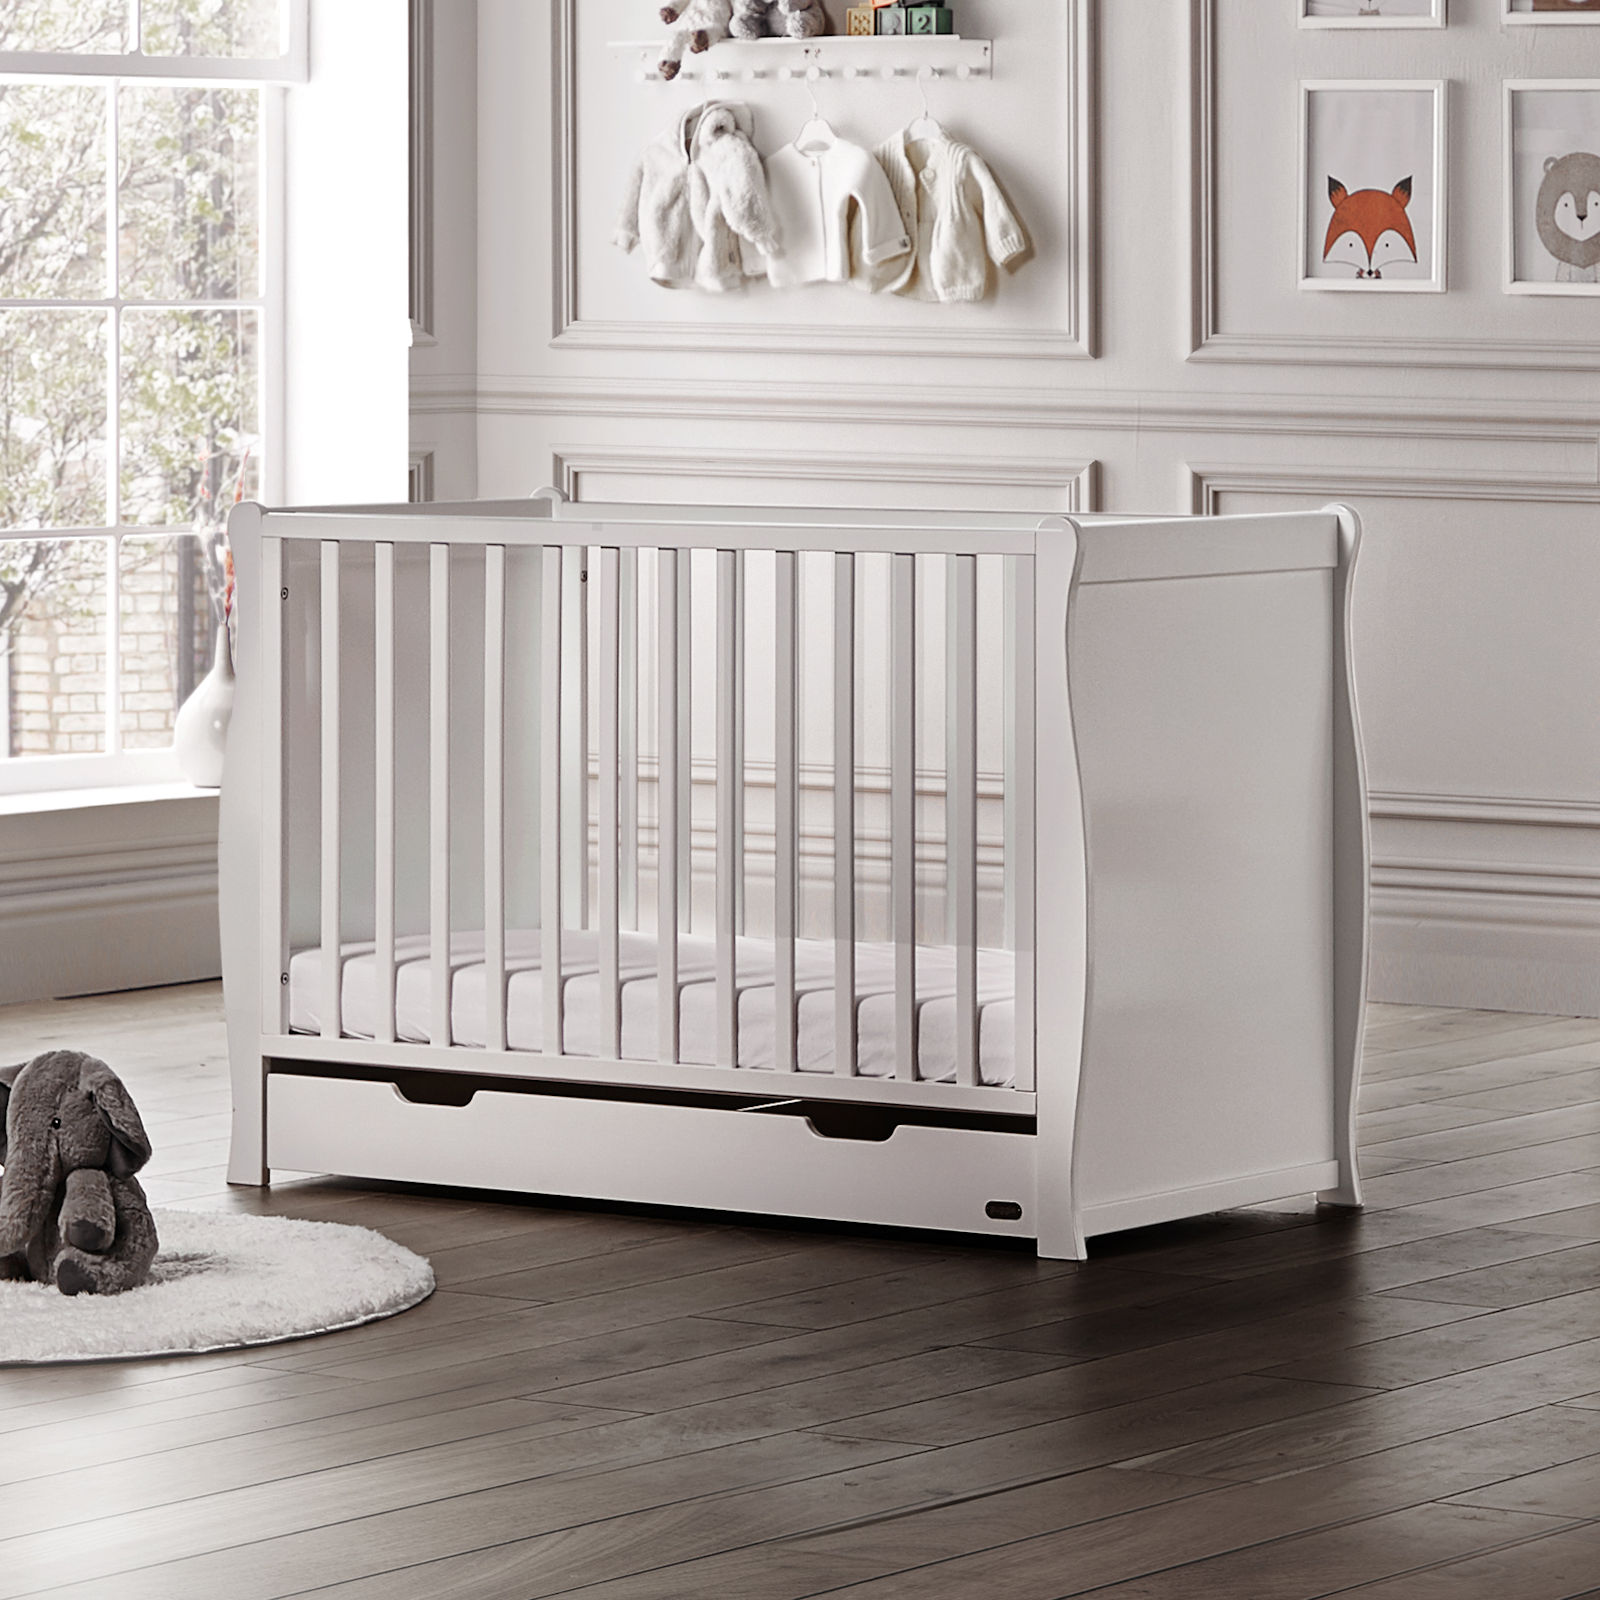 Puggle Chelford Sleigh Cot With Storage Drawer - White